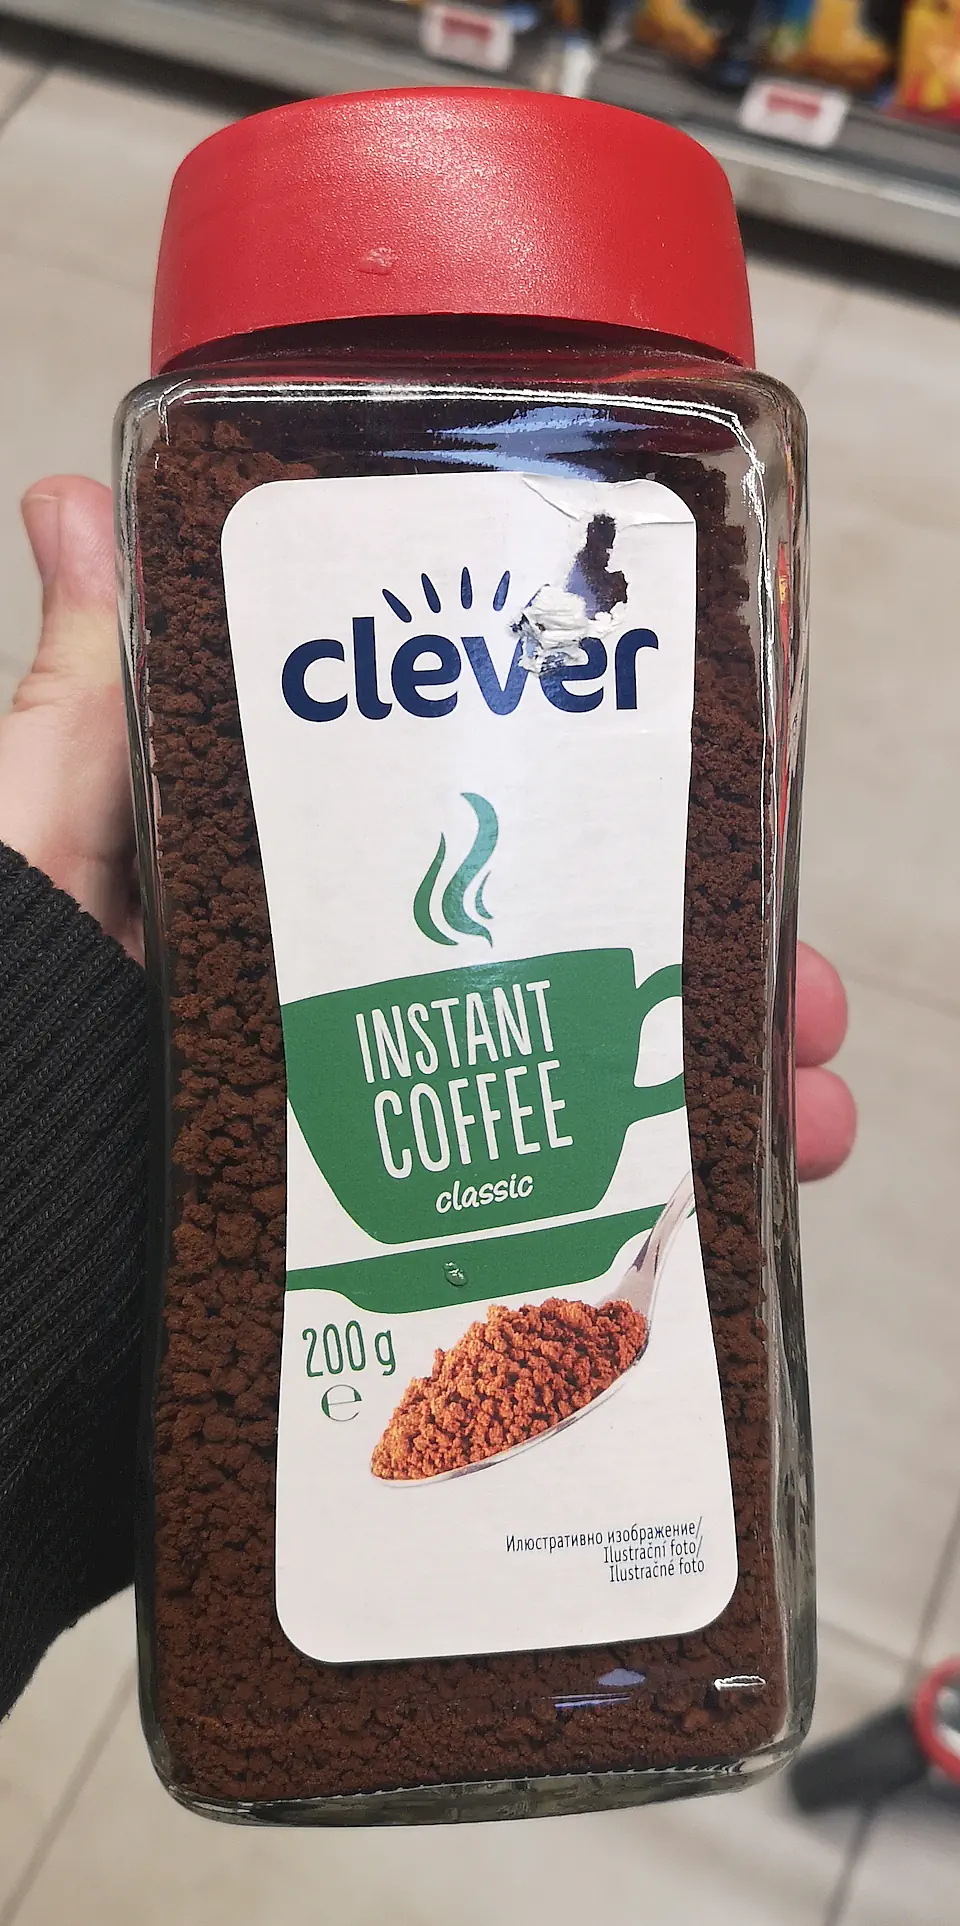 Clever instant coffe clasic